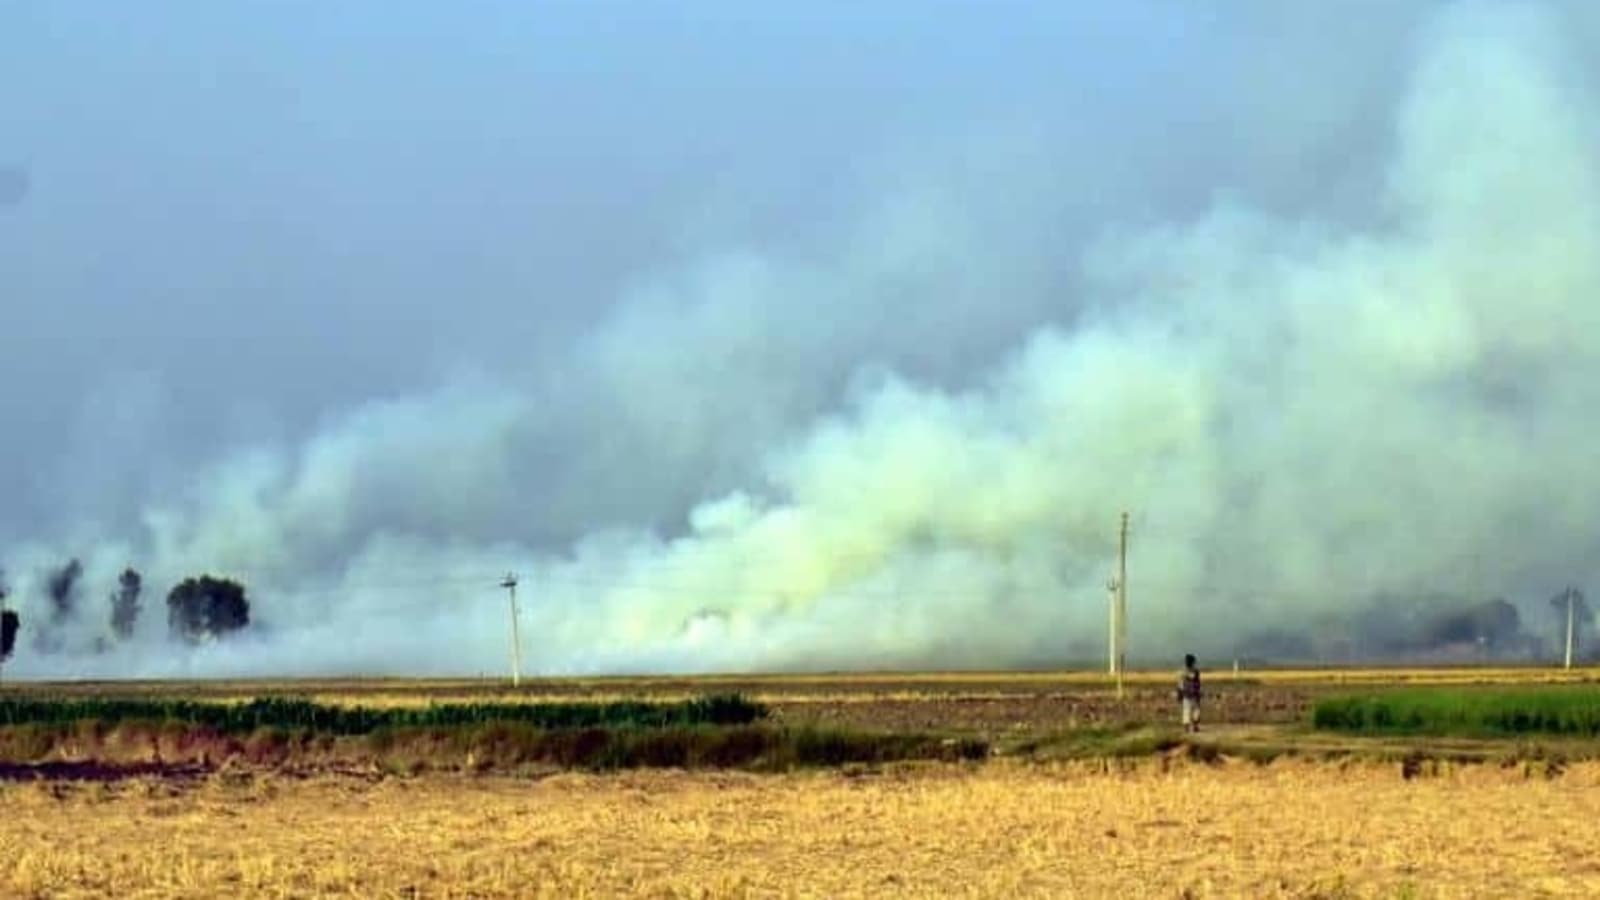 The burning of straw and stubble by farmers is the main cause of air pollution in northern India.